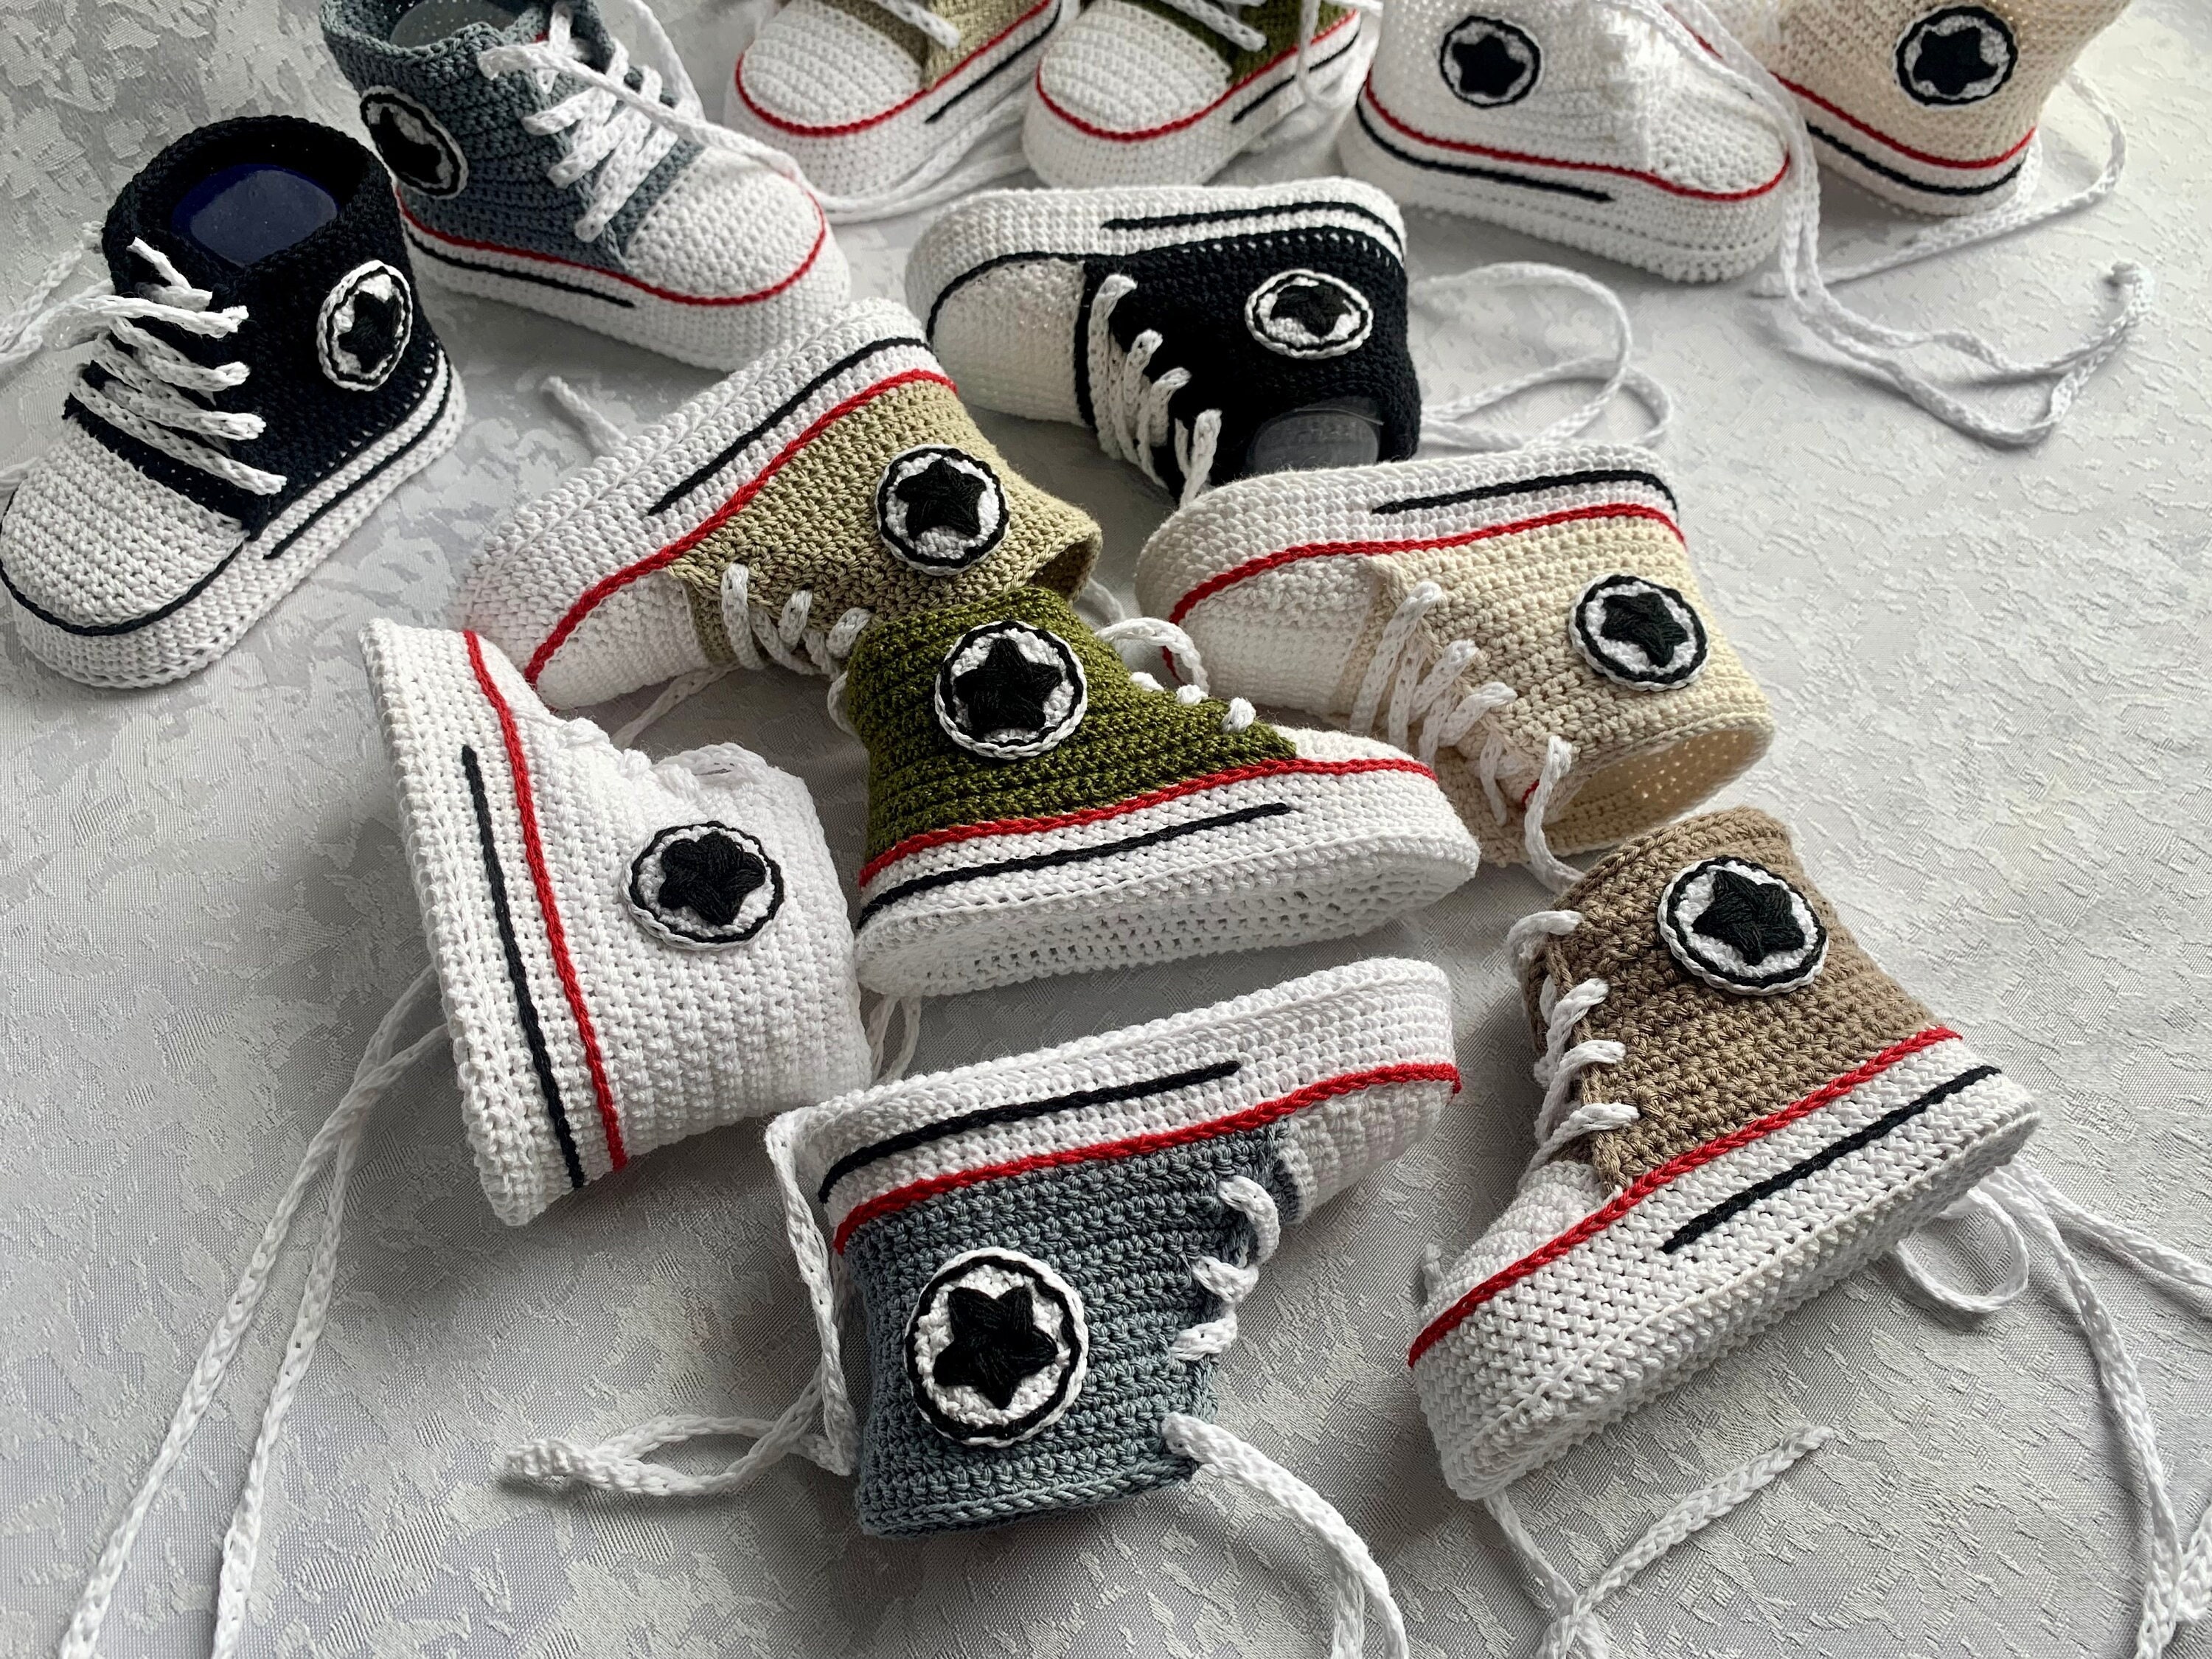 Unisex Converse Etsy Booty Footwear Newborn Baby Shower Girl Outfit Crochet Australia Gift Shoes Boy Baby Booties Baby Crochet Chucks Shoe Baby - Sneakers